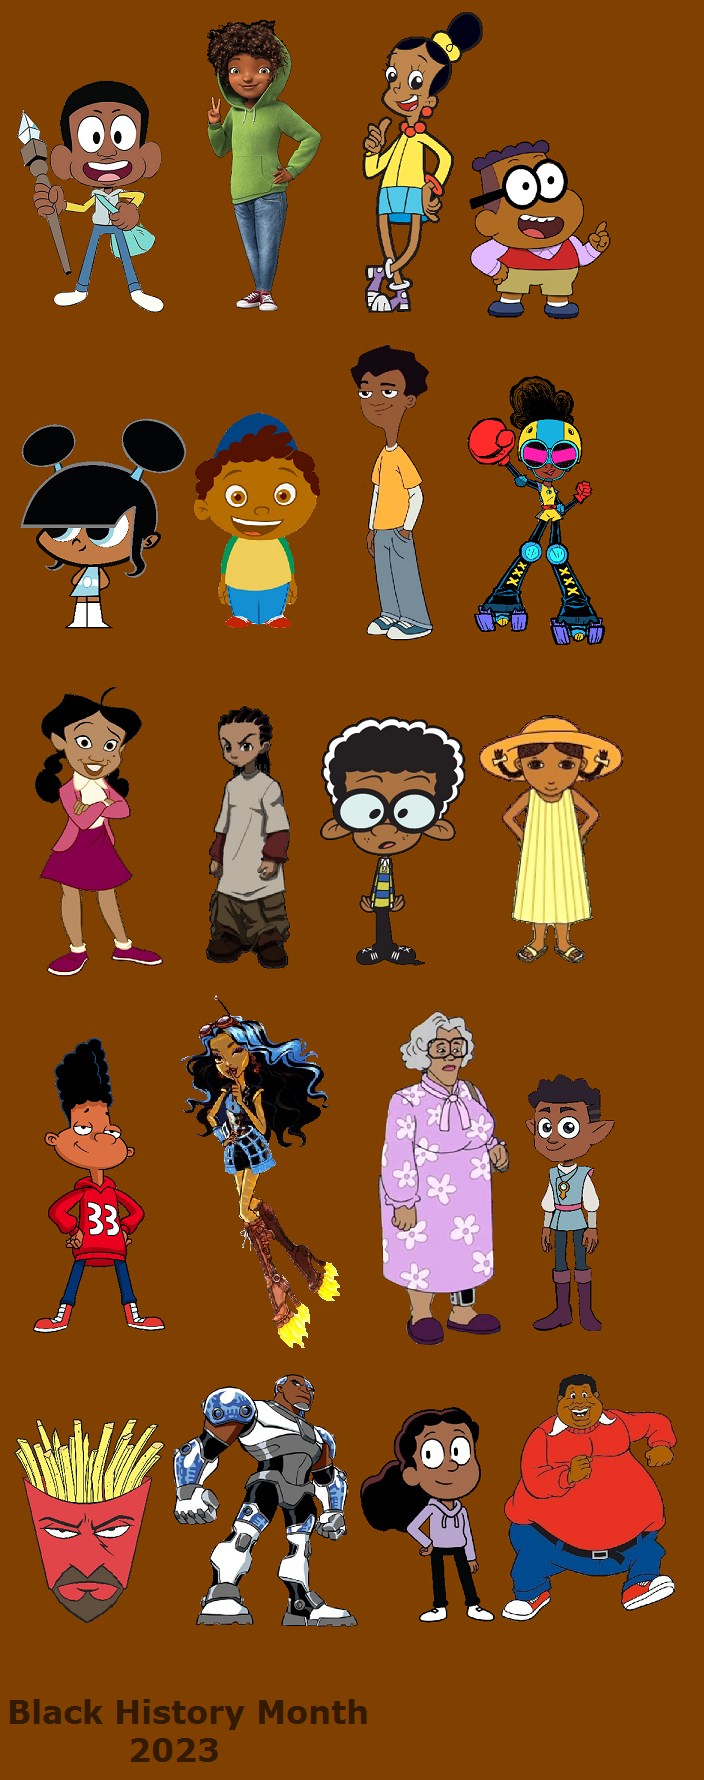 Black Cartoon Characters 2023 by RealisticDrawings200 on DeviantArt